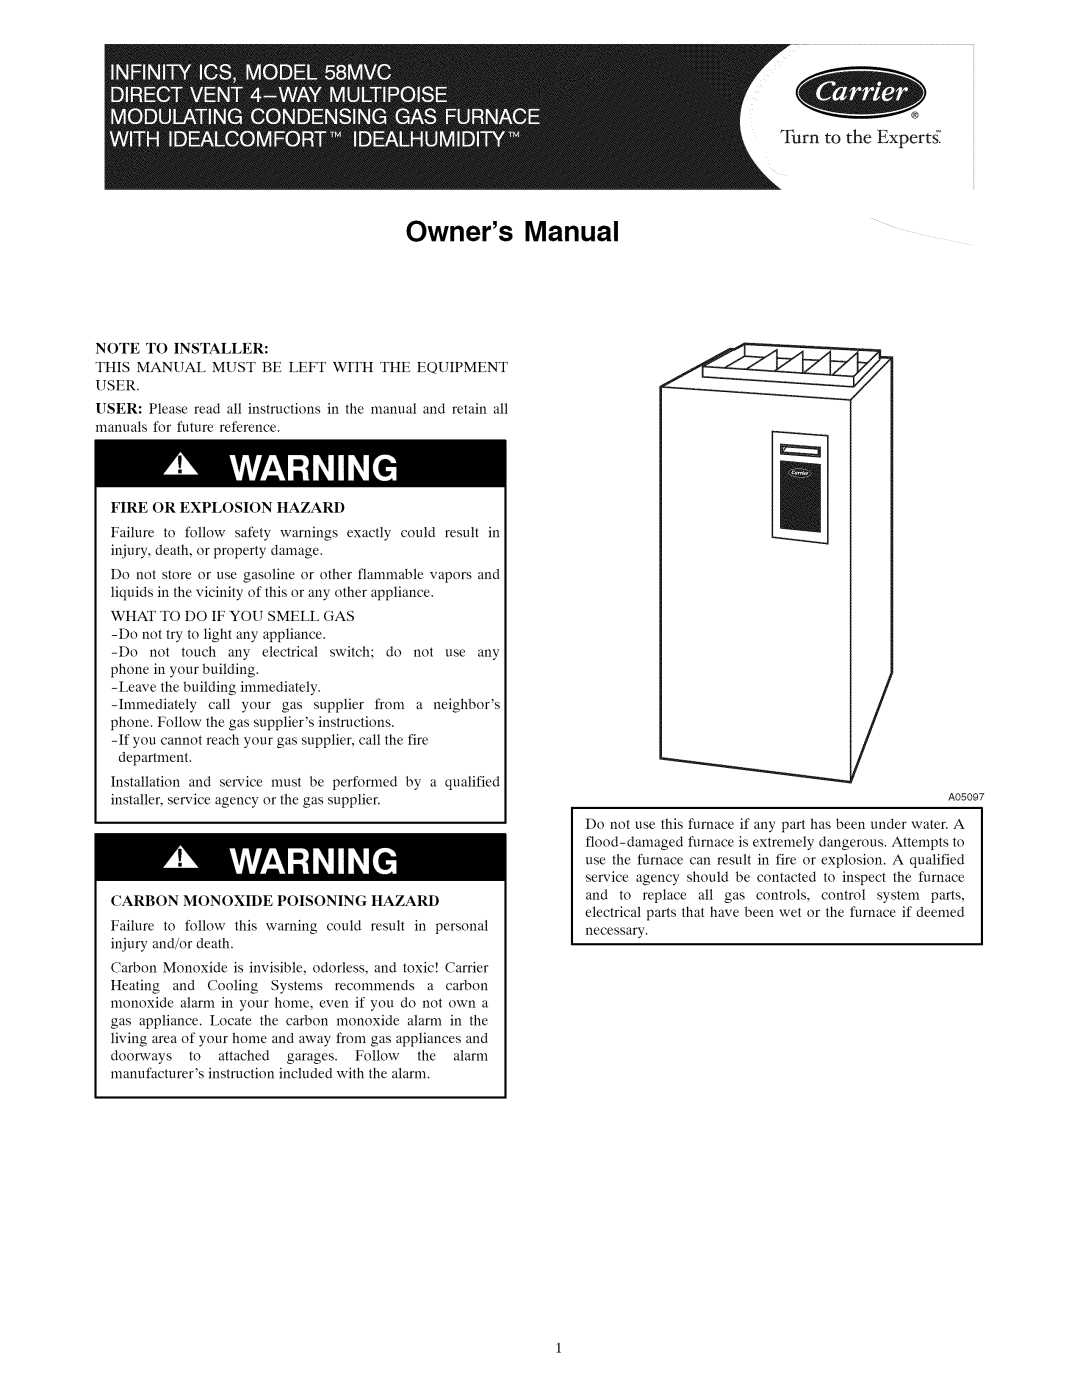 Carrier 58MVC owner manual Turn to the Expertg, Note To Installer 